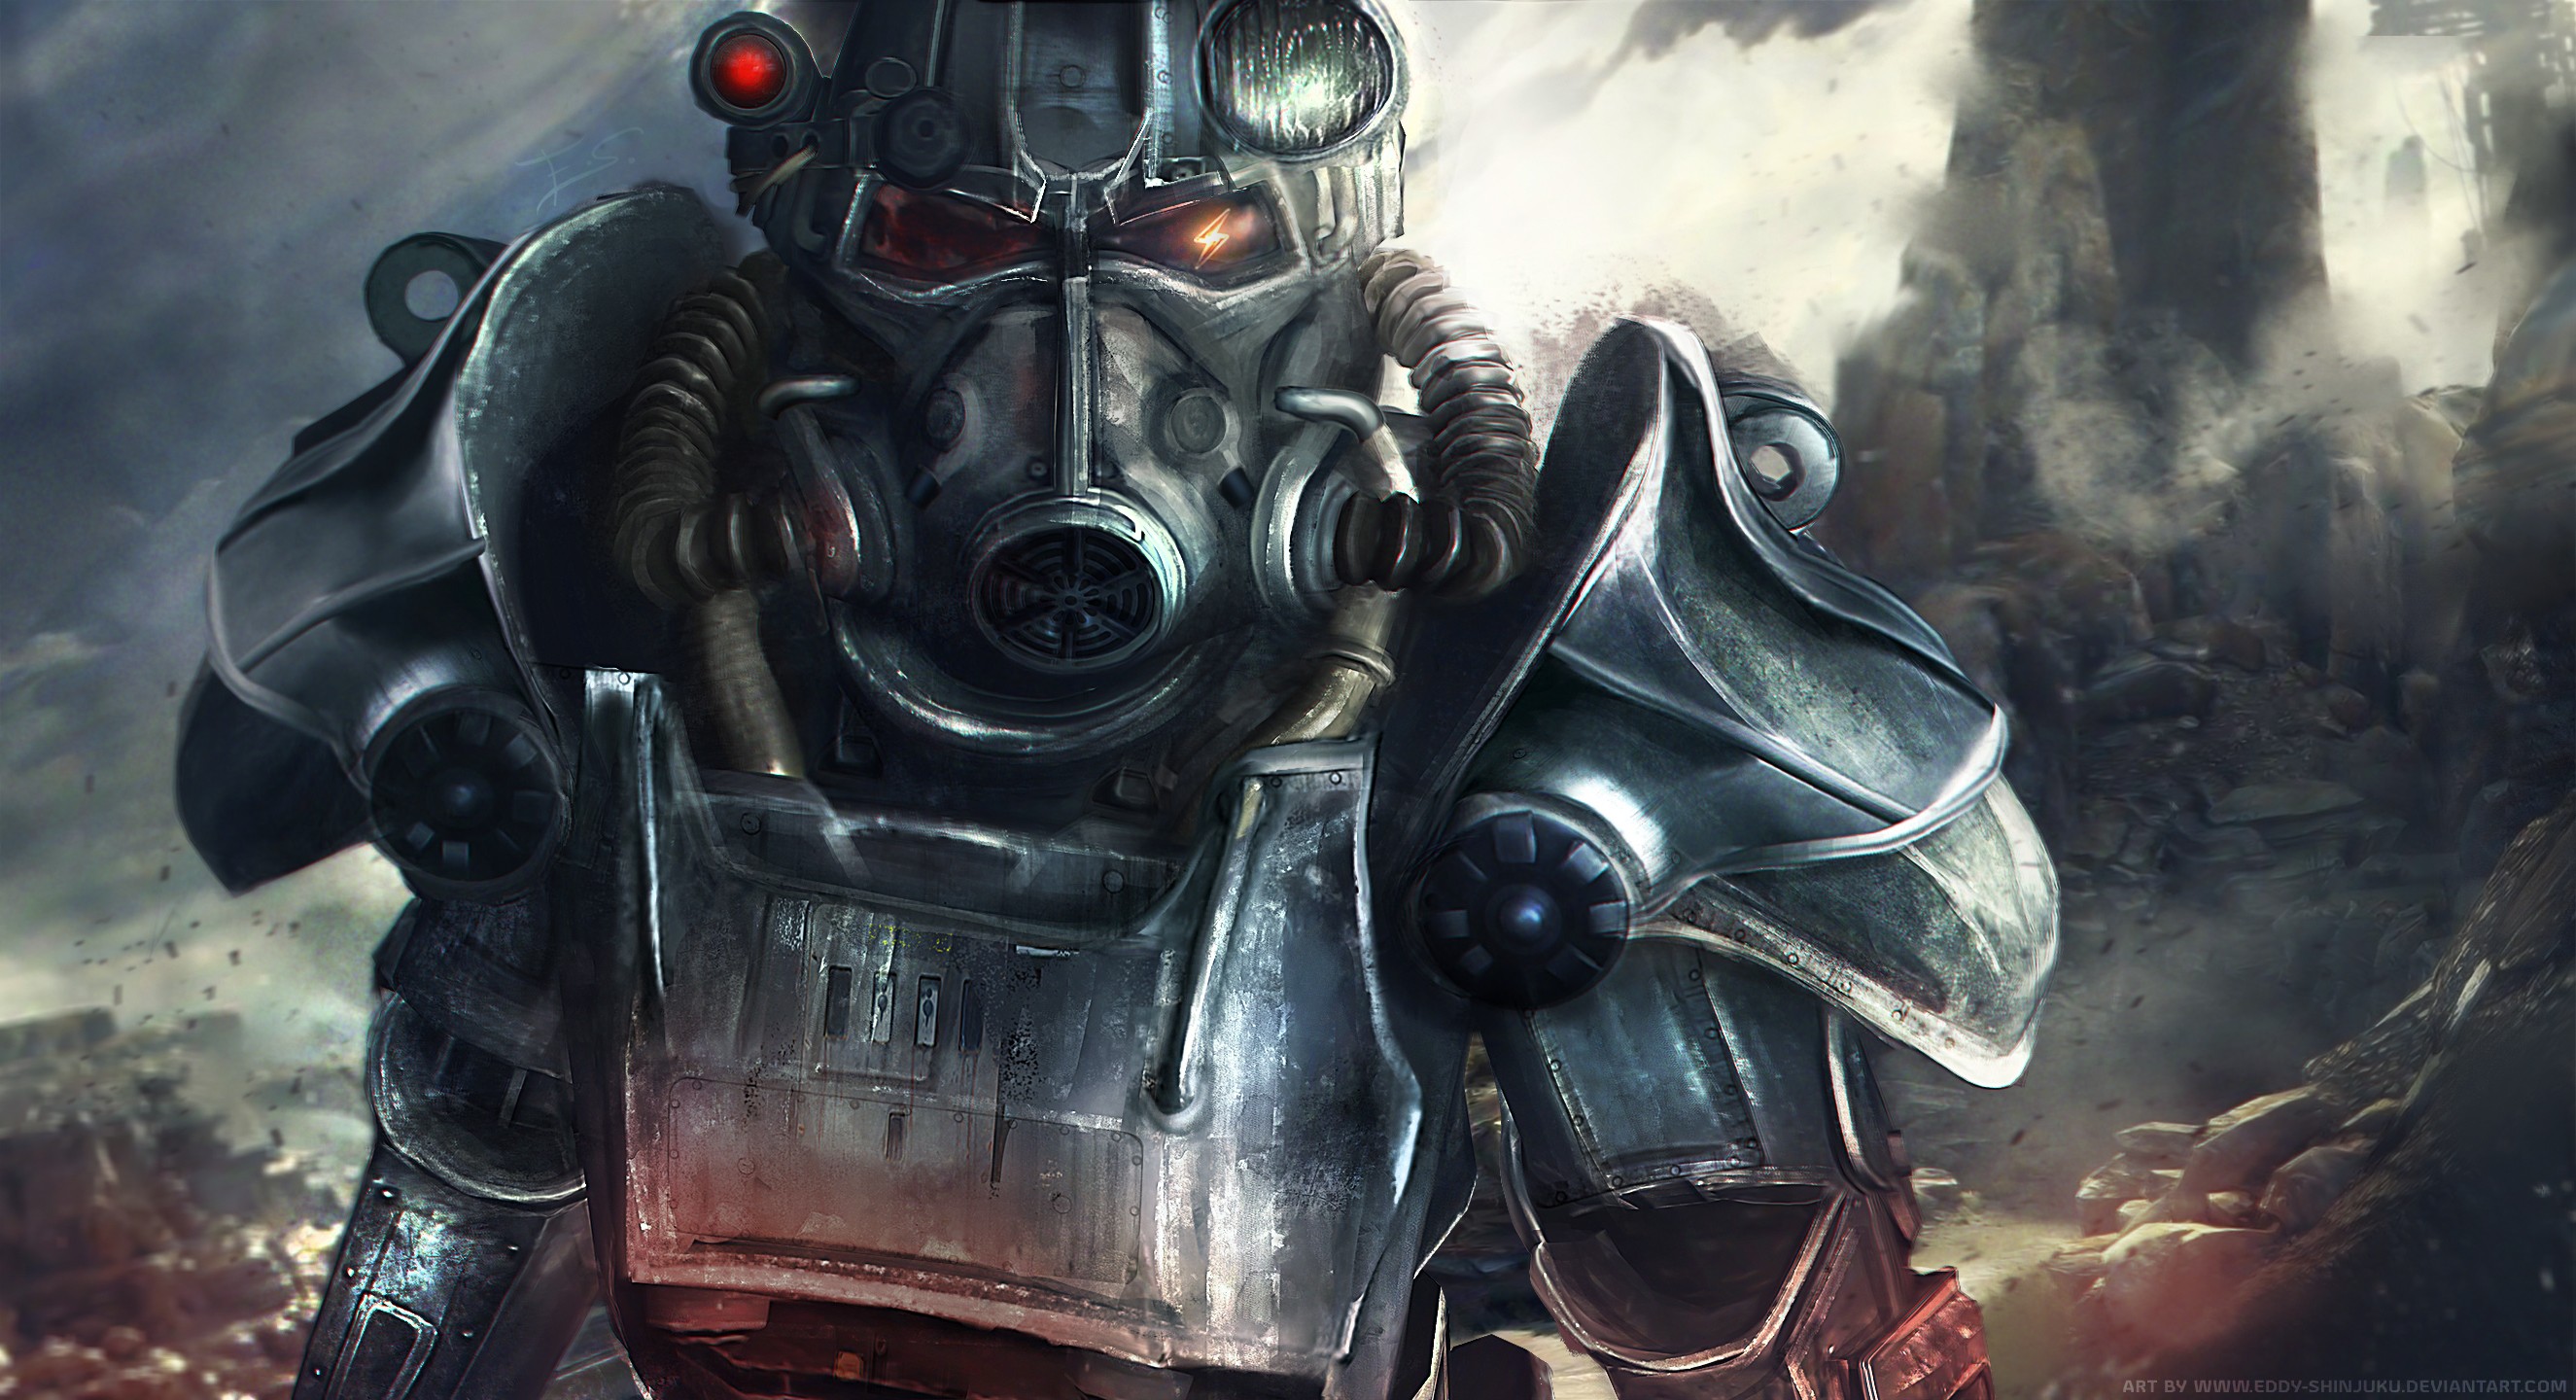 General 2650x1440 Fallout 4 video games artwork Fallout Bethesda Softworks Brotherhood of Steel nuclear apocalyptic power armor PC gaming DeviantArt video game art